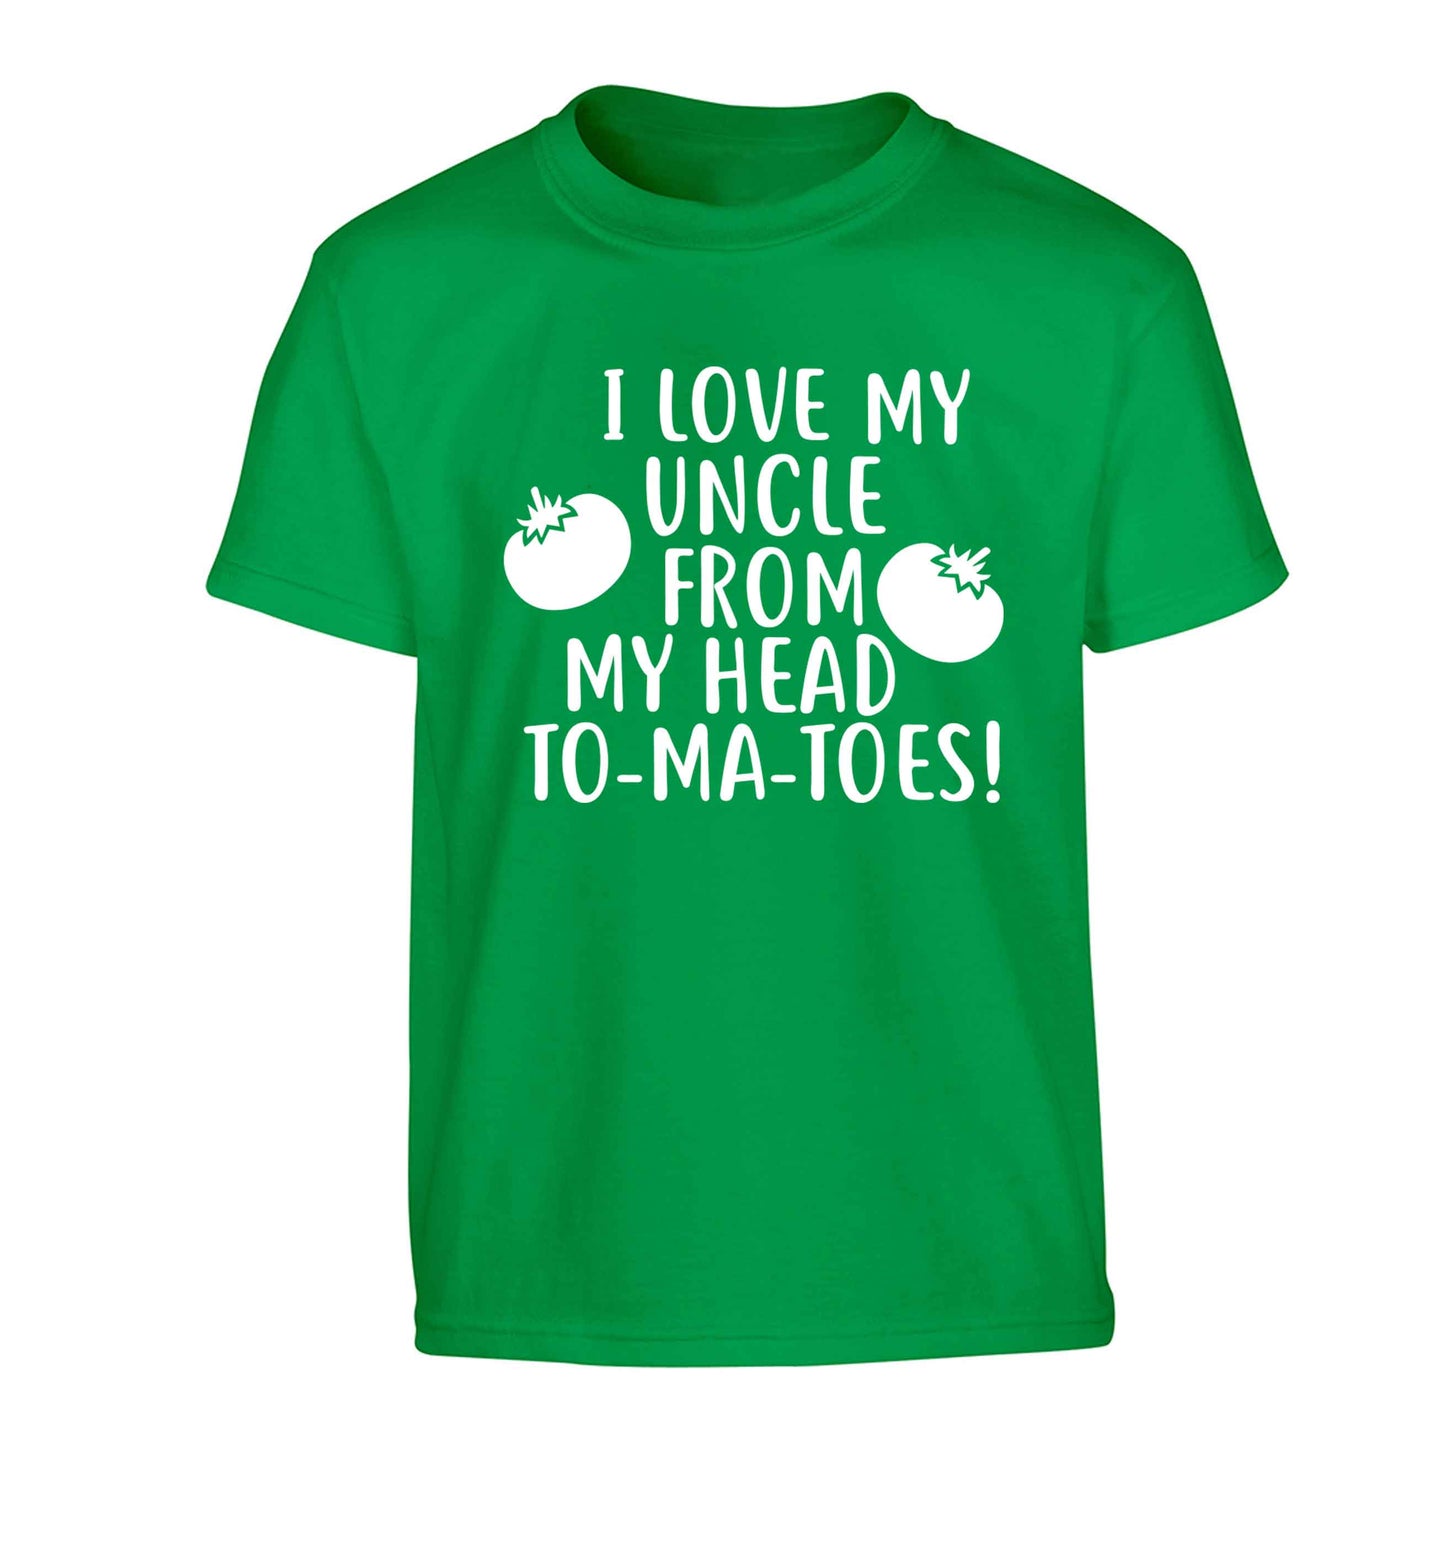 I love my uncle from my head To-Ma-Toes Children's green Tshirt 12-13 Years